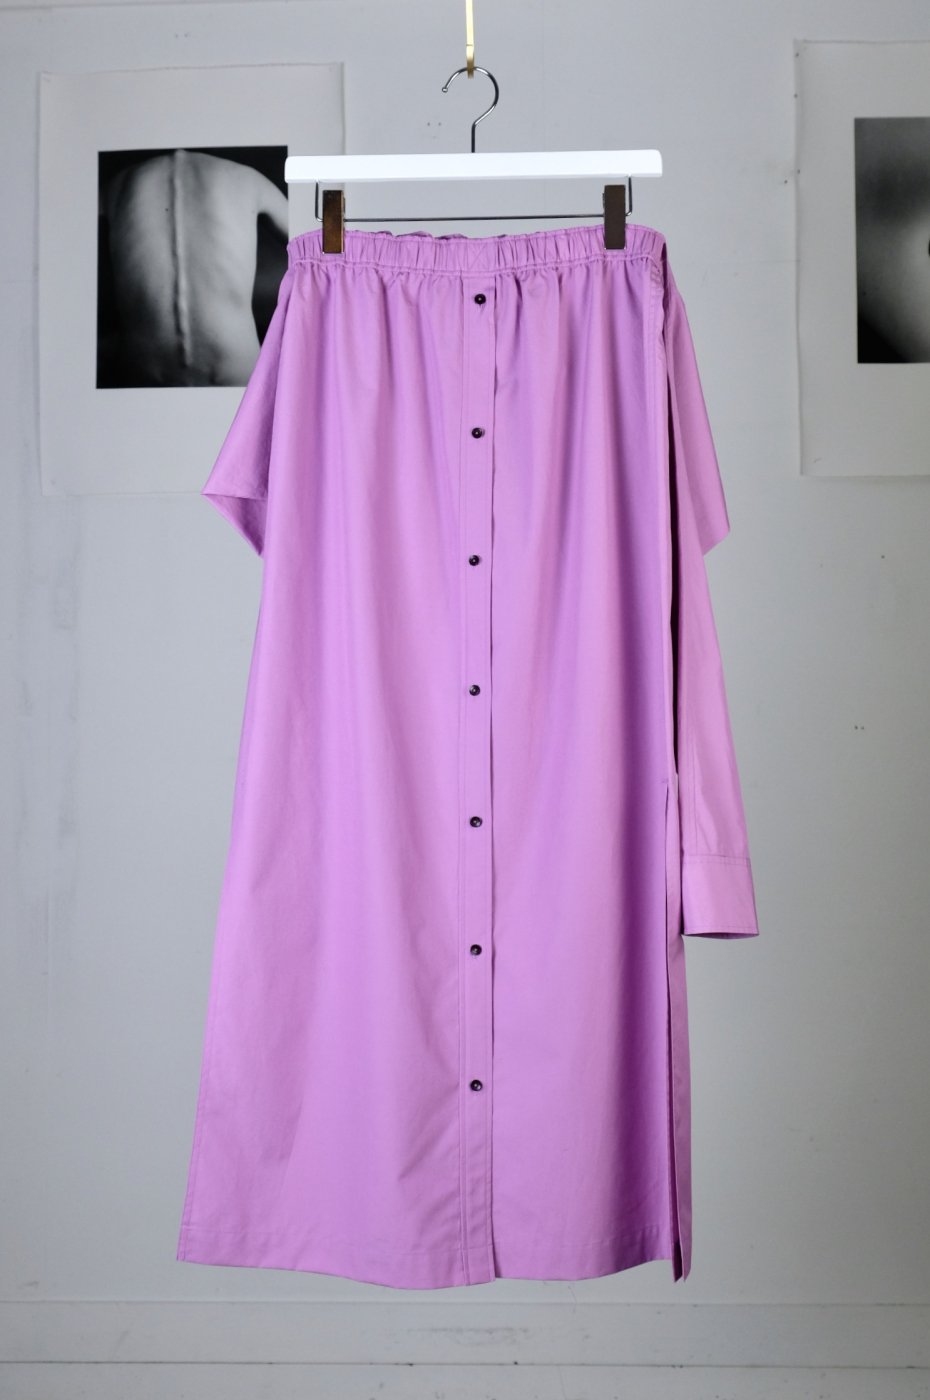 <img class='new_mark_img1' src='https://img.shop-pro.jp/img/new/icons8.gif' style='border:none;display:inline;margin:0px;padding:0px;width:auto;' />CURRENTAGE-SHIRT DRESS SKIRT-LILAC